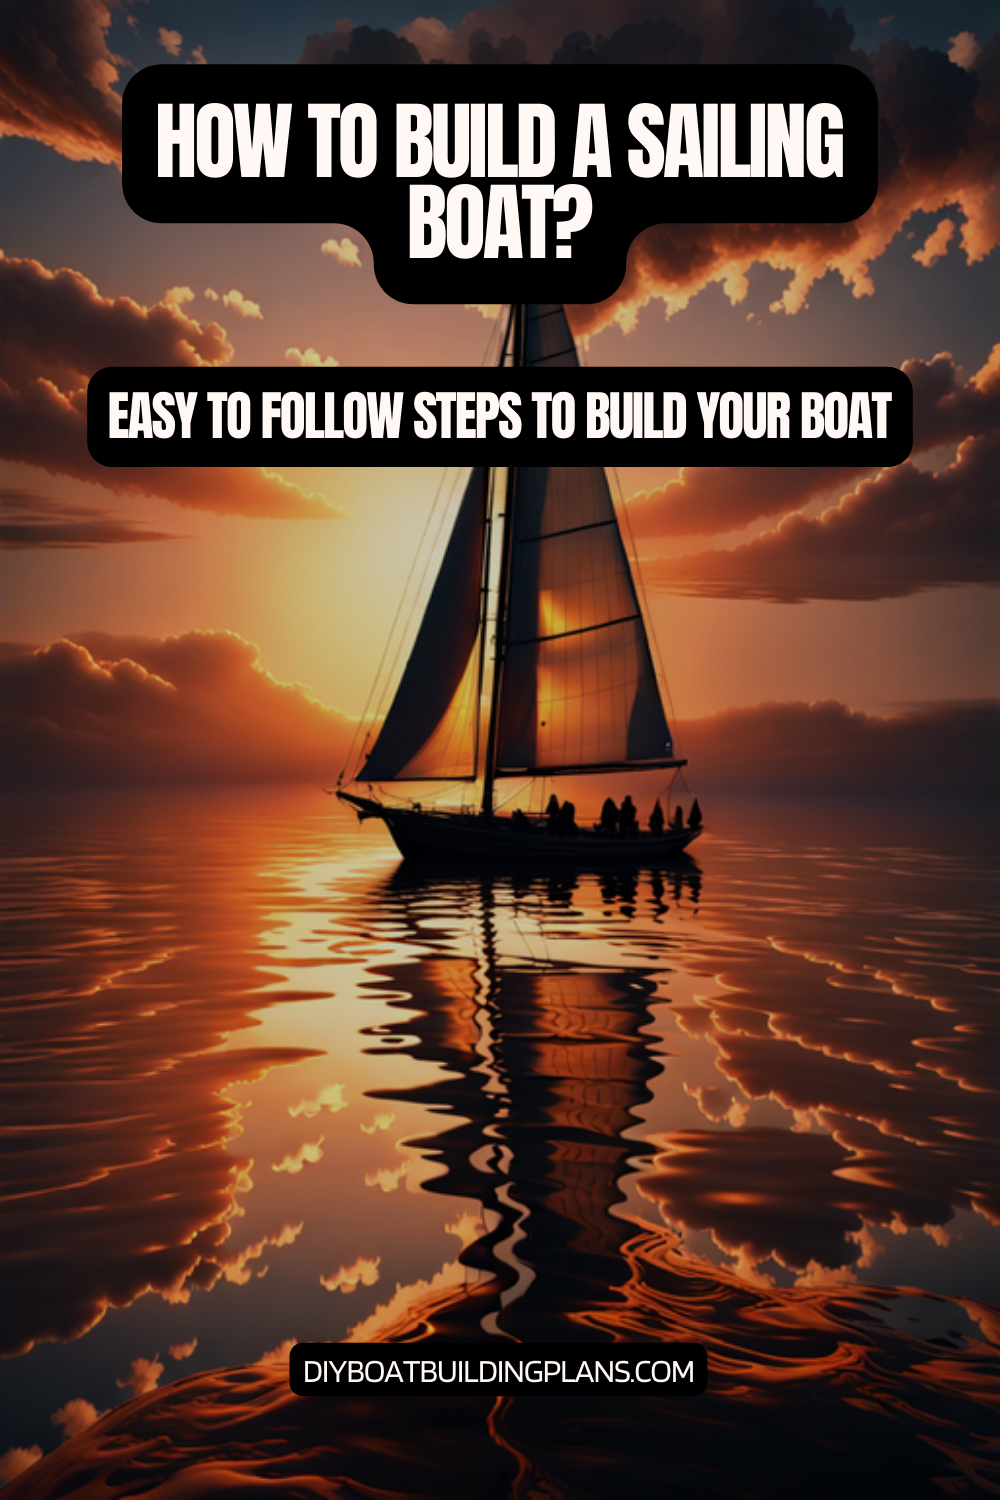 How To Build a Sailing Boat